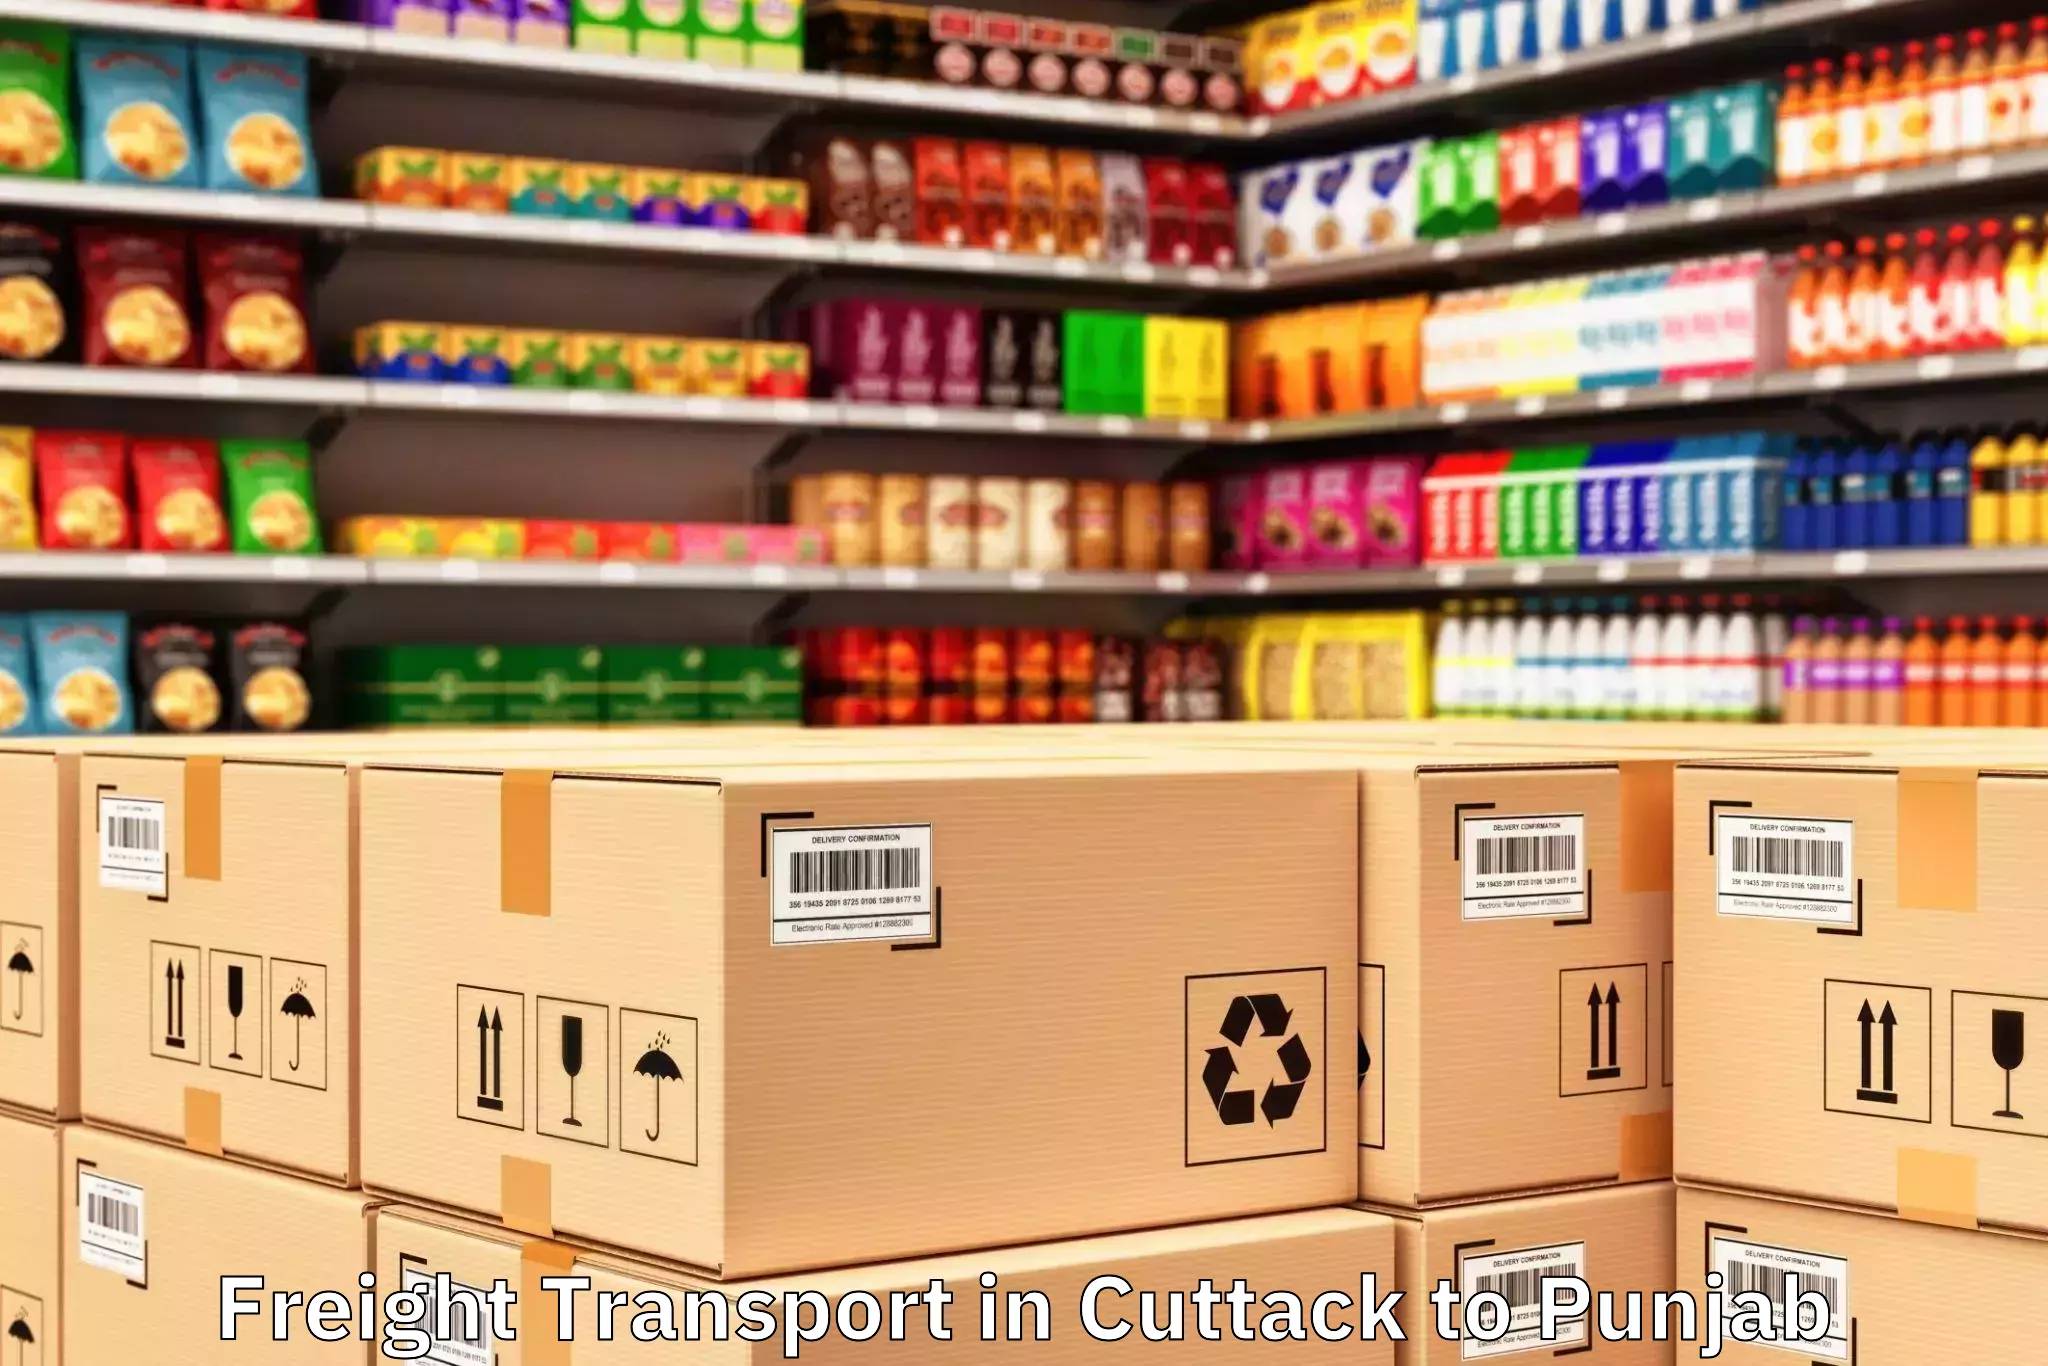 Discover Cuttack to Punjab Freight Transport